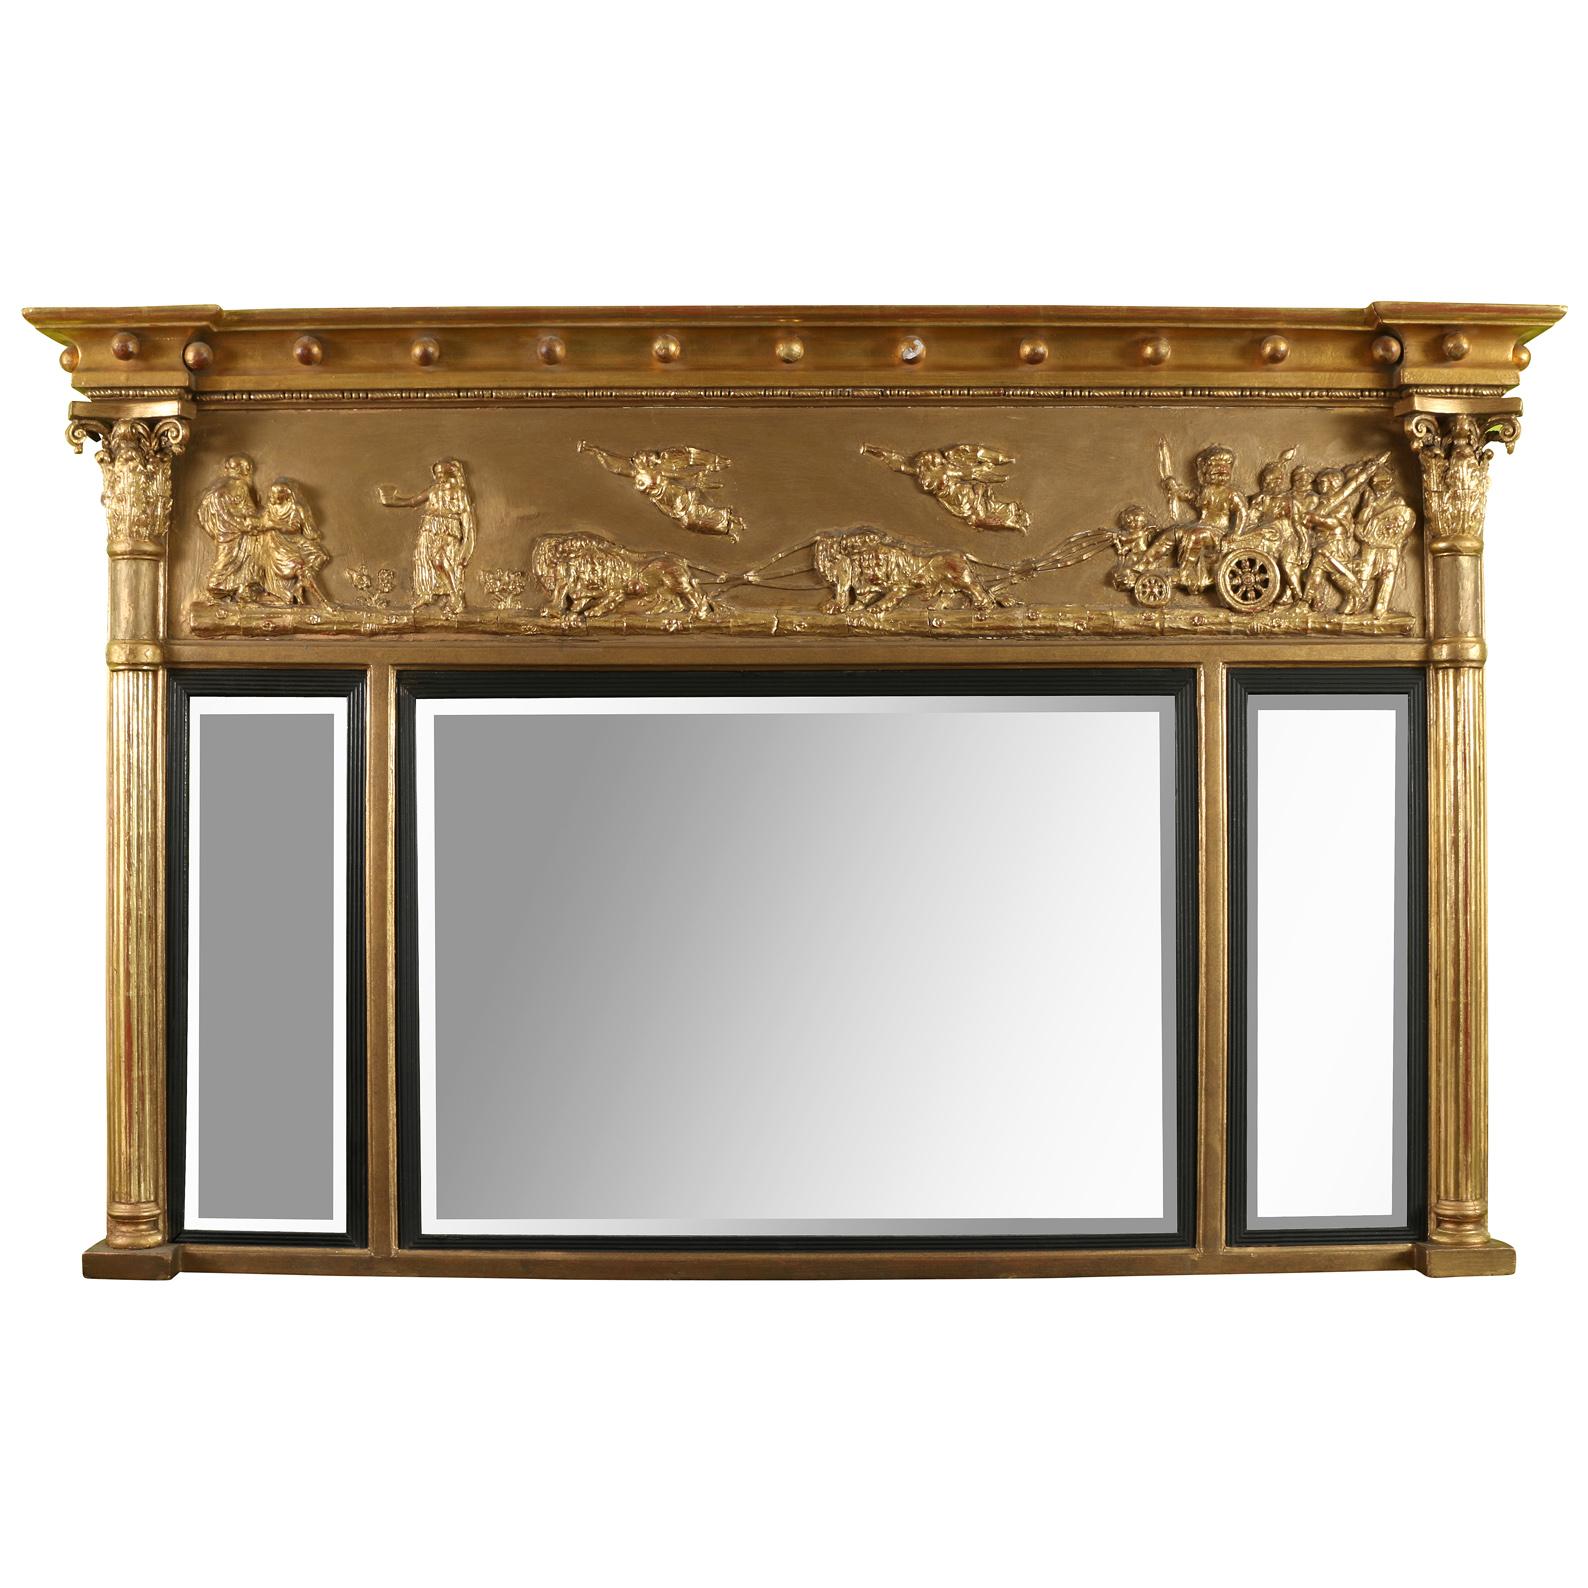 An elegant 19th-century Regency period giltwood  over mantel mirror consisting of three mirror sections flanked by reeded columns with intricately carved capitals.  The top section of the mirror is decorated with a mythological scene in exquisite